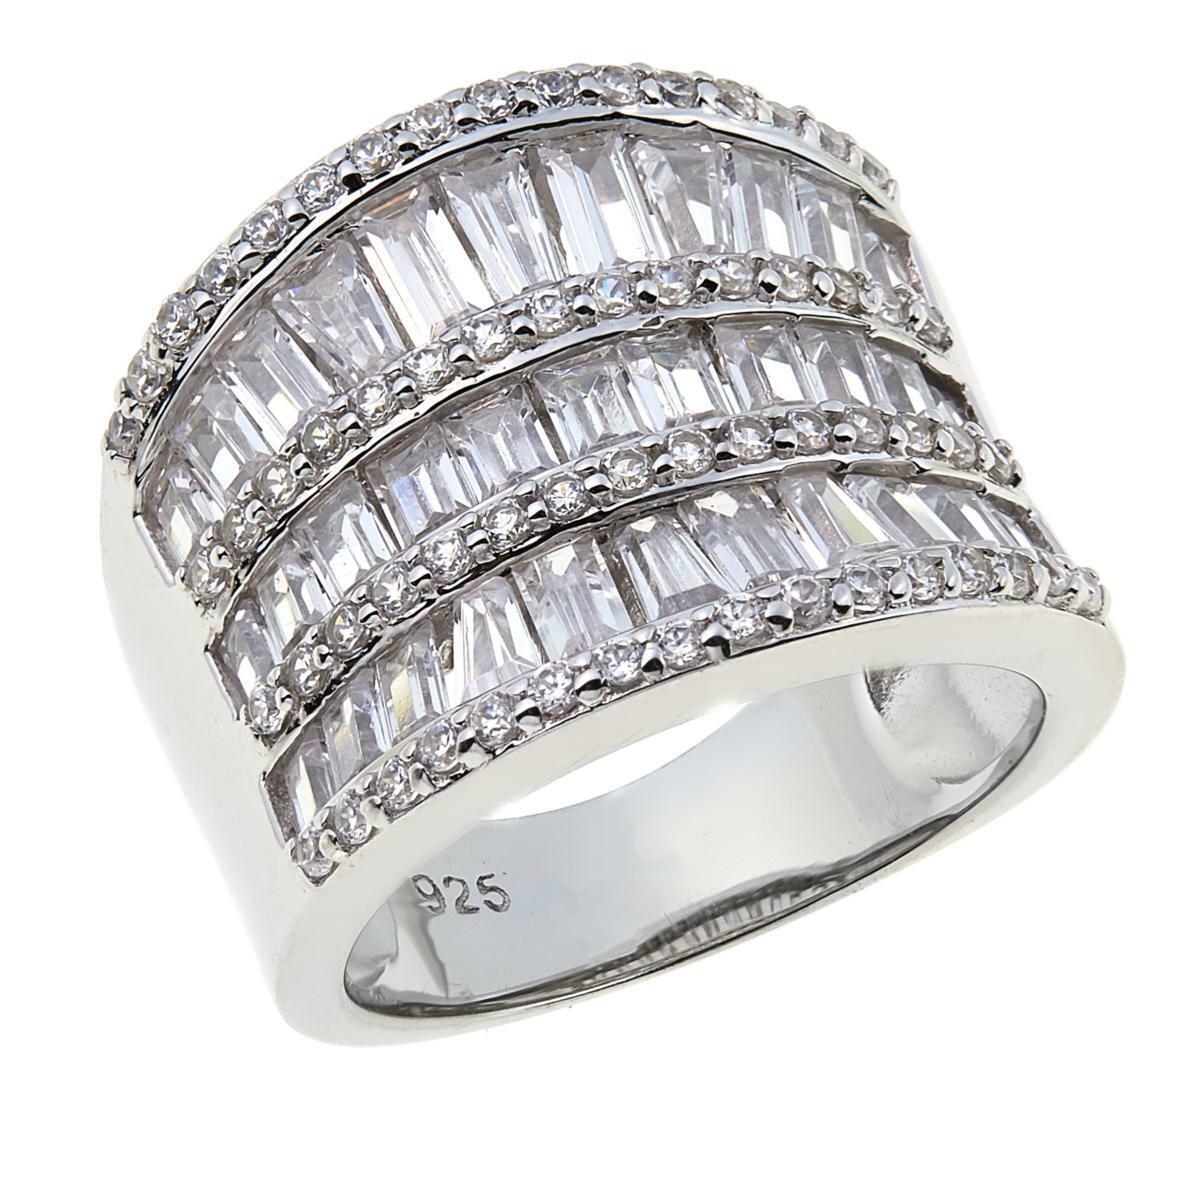 Absolute 3.46Ctw Cz Baguette And Round Multi-Row Saddle Ring Size 6 Hsn $90